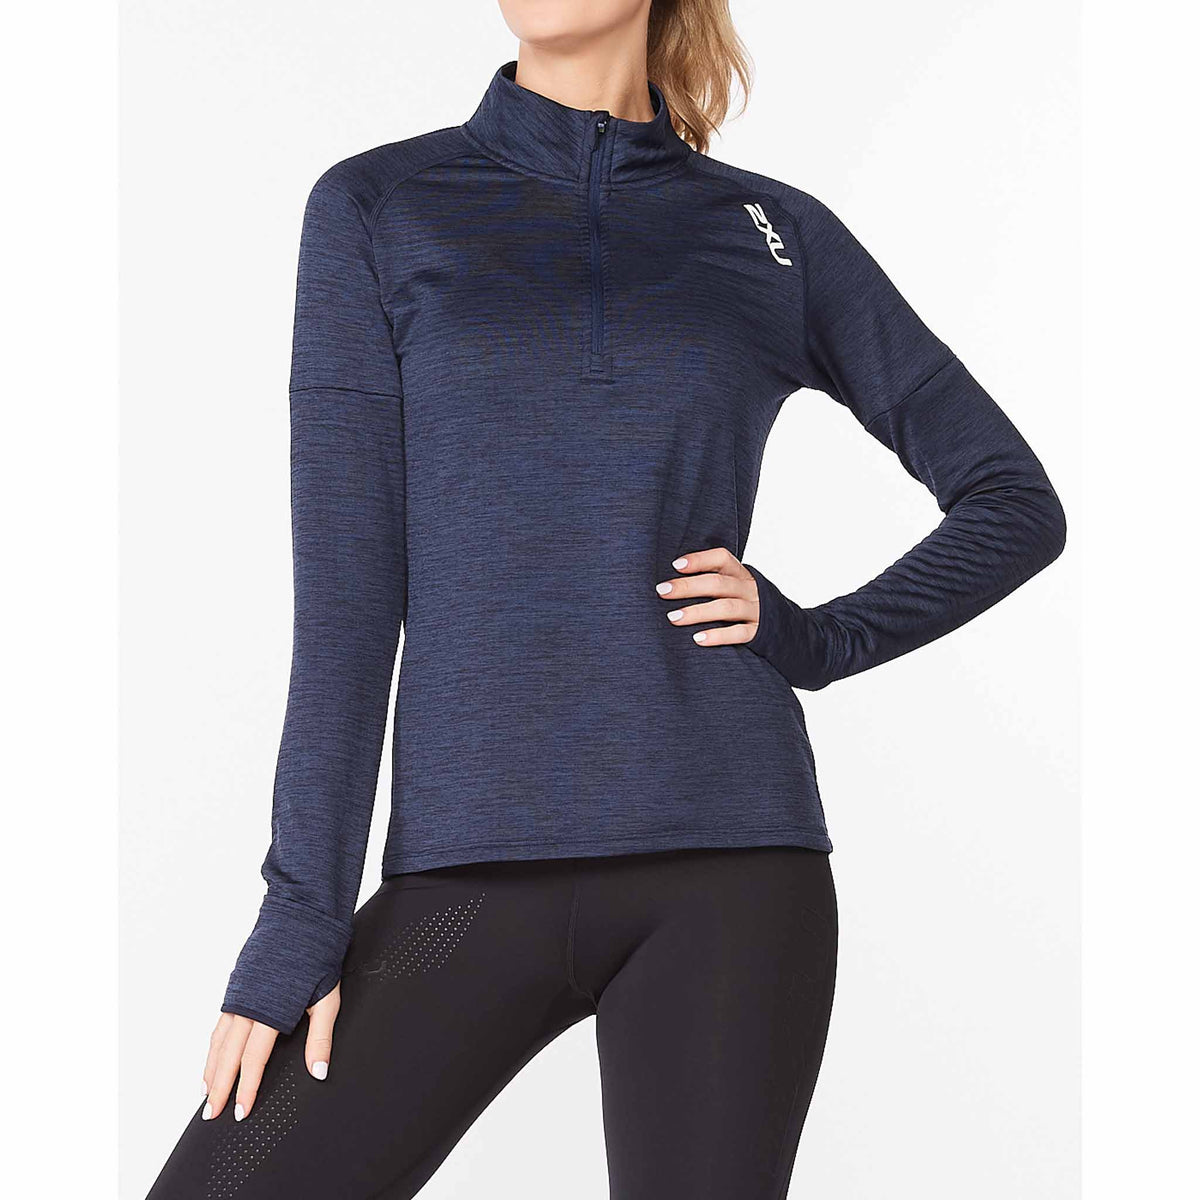 2XU Chandail manches longues Ignition 1/4 Zip pour femme midnight